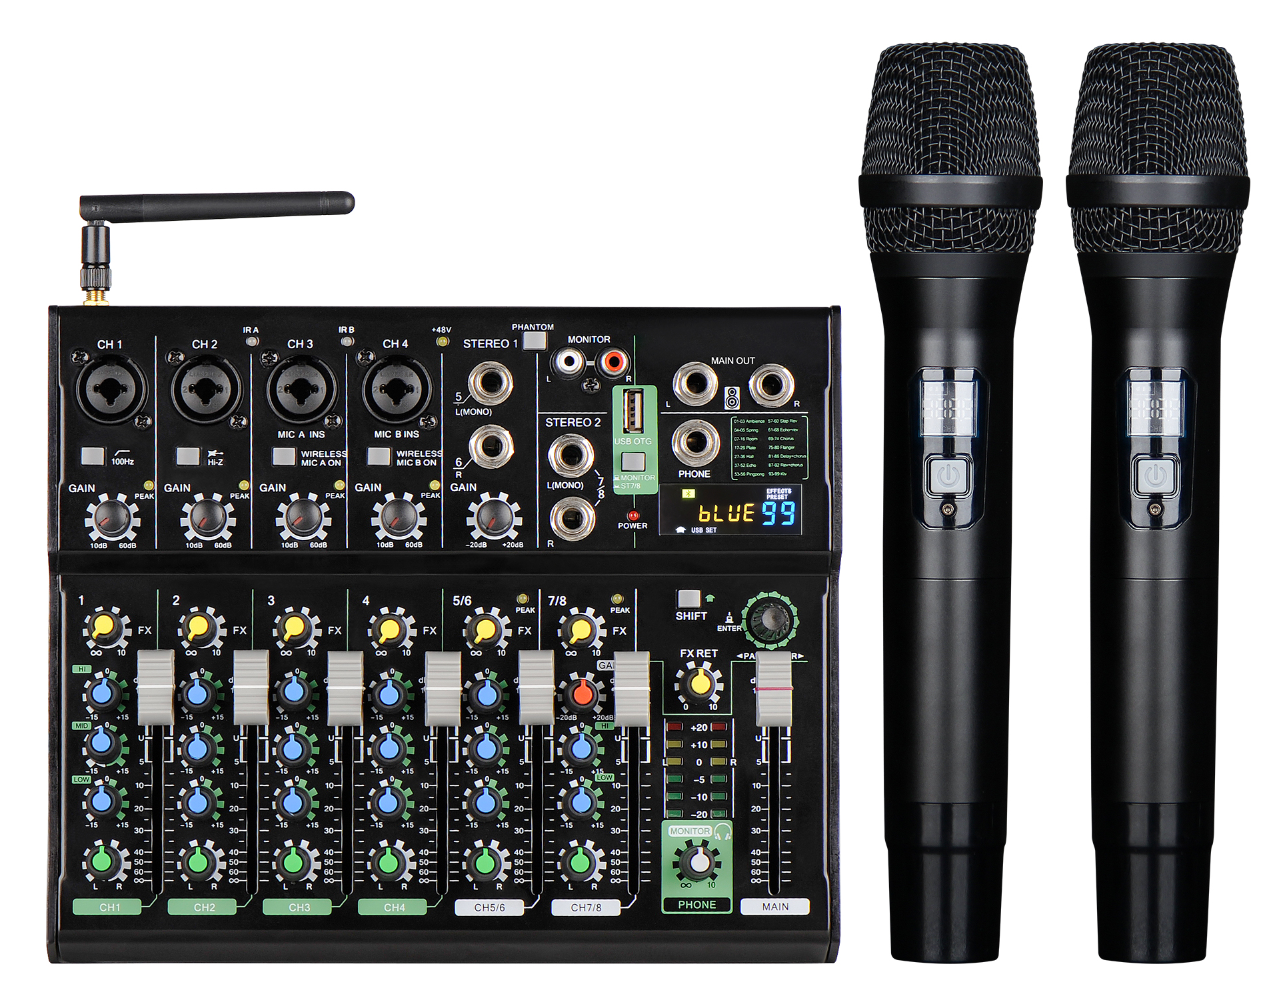 MIC802 - Mixer 8 Channels / 2 Wireless Microphones / Bluetooth / 4 Mono + 2 Stereo Inputs